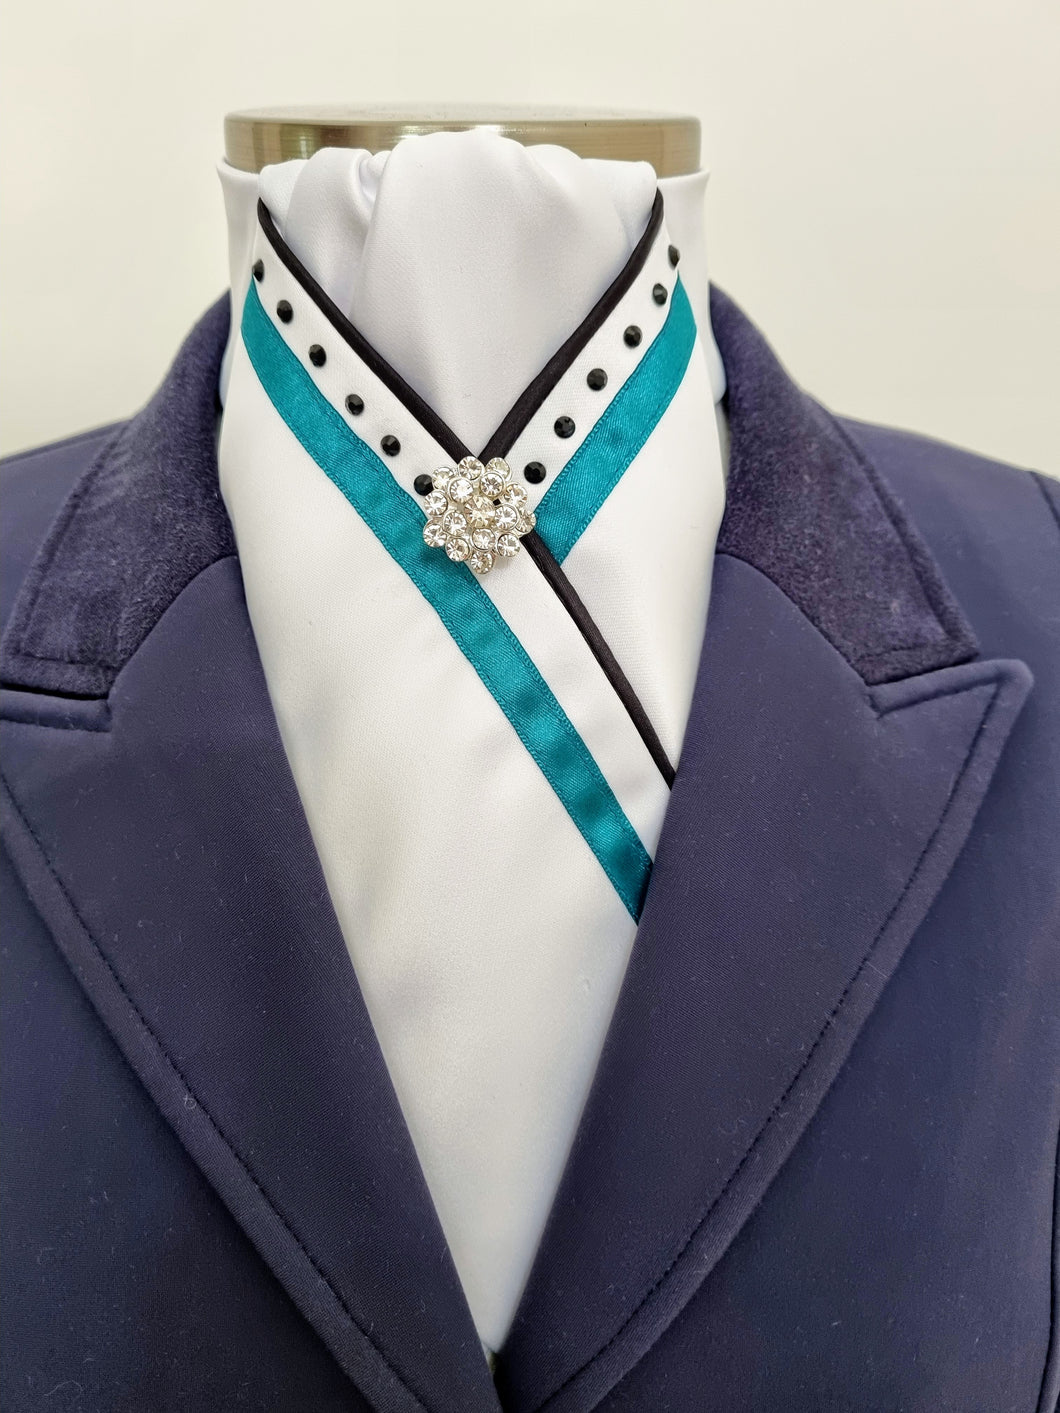 ERA SOPHIE STOCK TIE - White Satin with Black satin piping, turquoise trim, black crystals & silver brooch